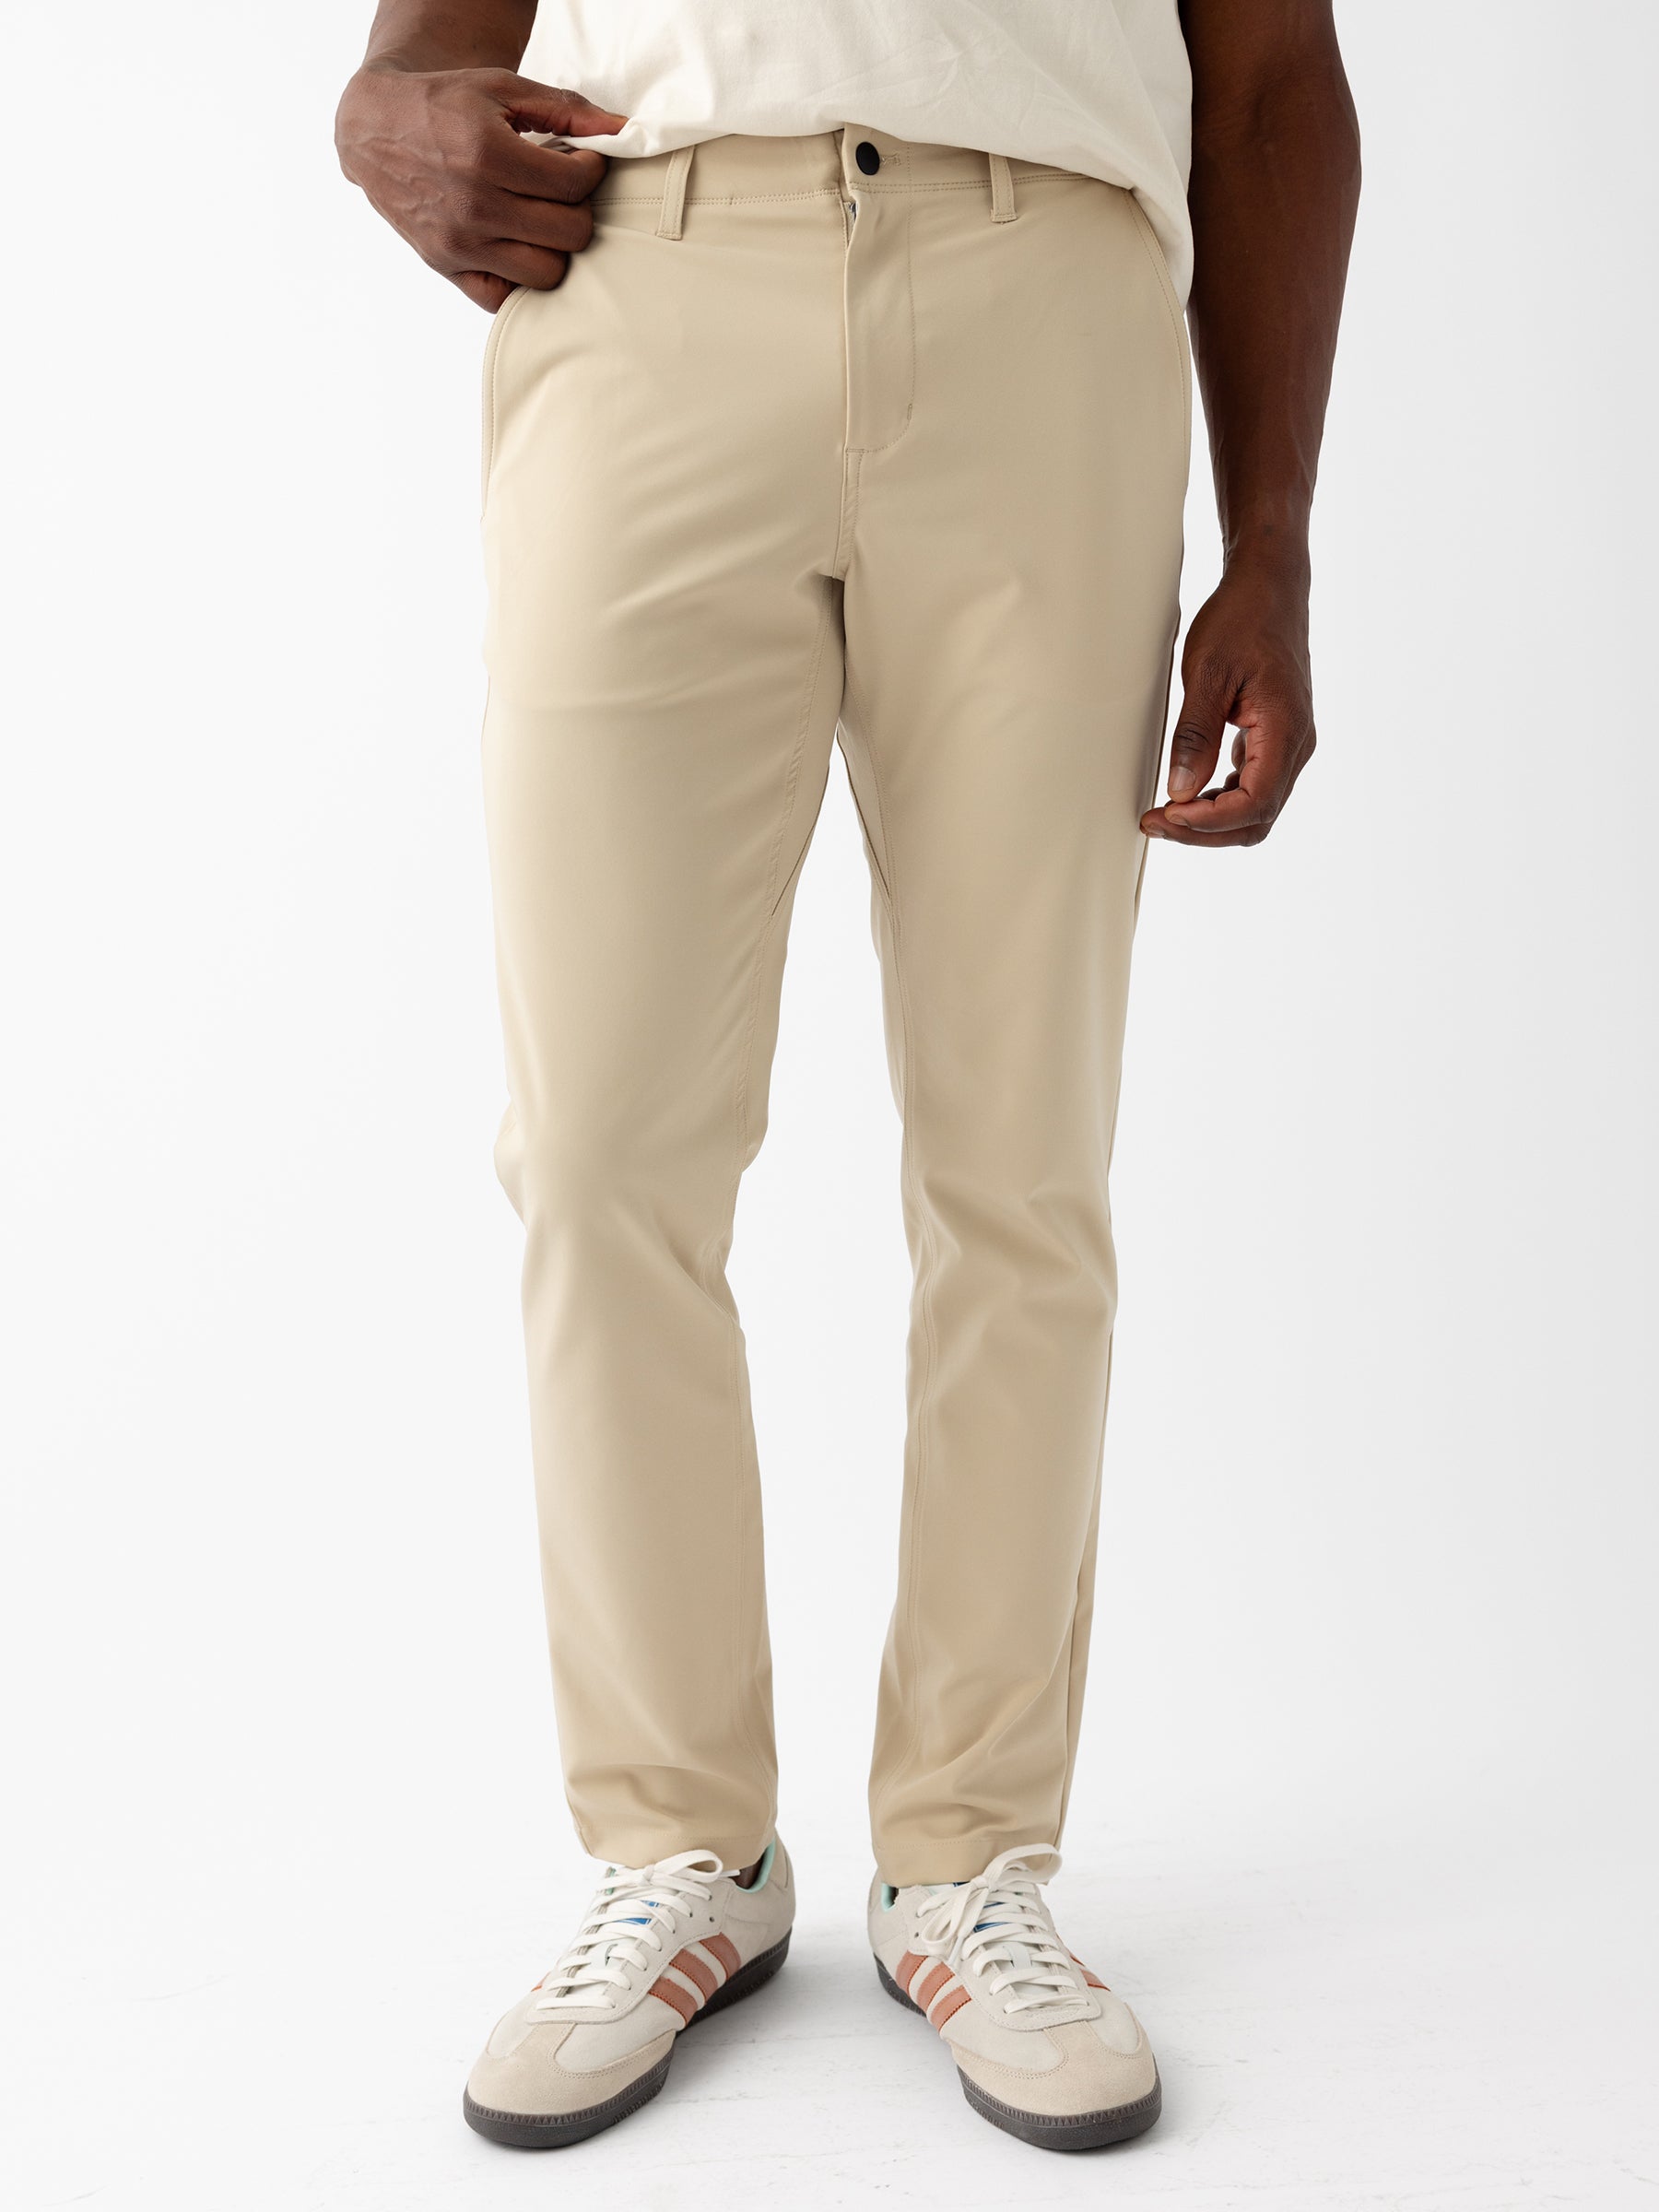 A person wearing Cozy Earth's Men's Everywhere Pant 30L in beige and a white shirt stands with one hand in their pocket. They are also wearing white sneakers featuring beige and green accents. The background is plain white. |Color:Khaki